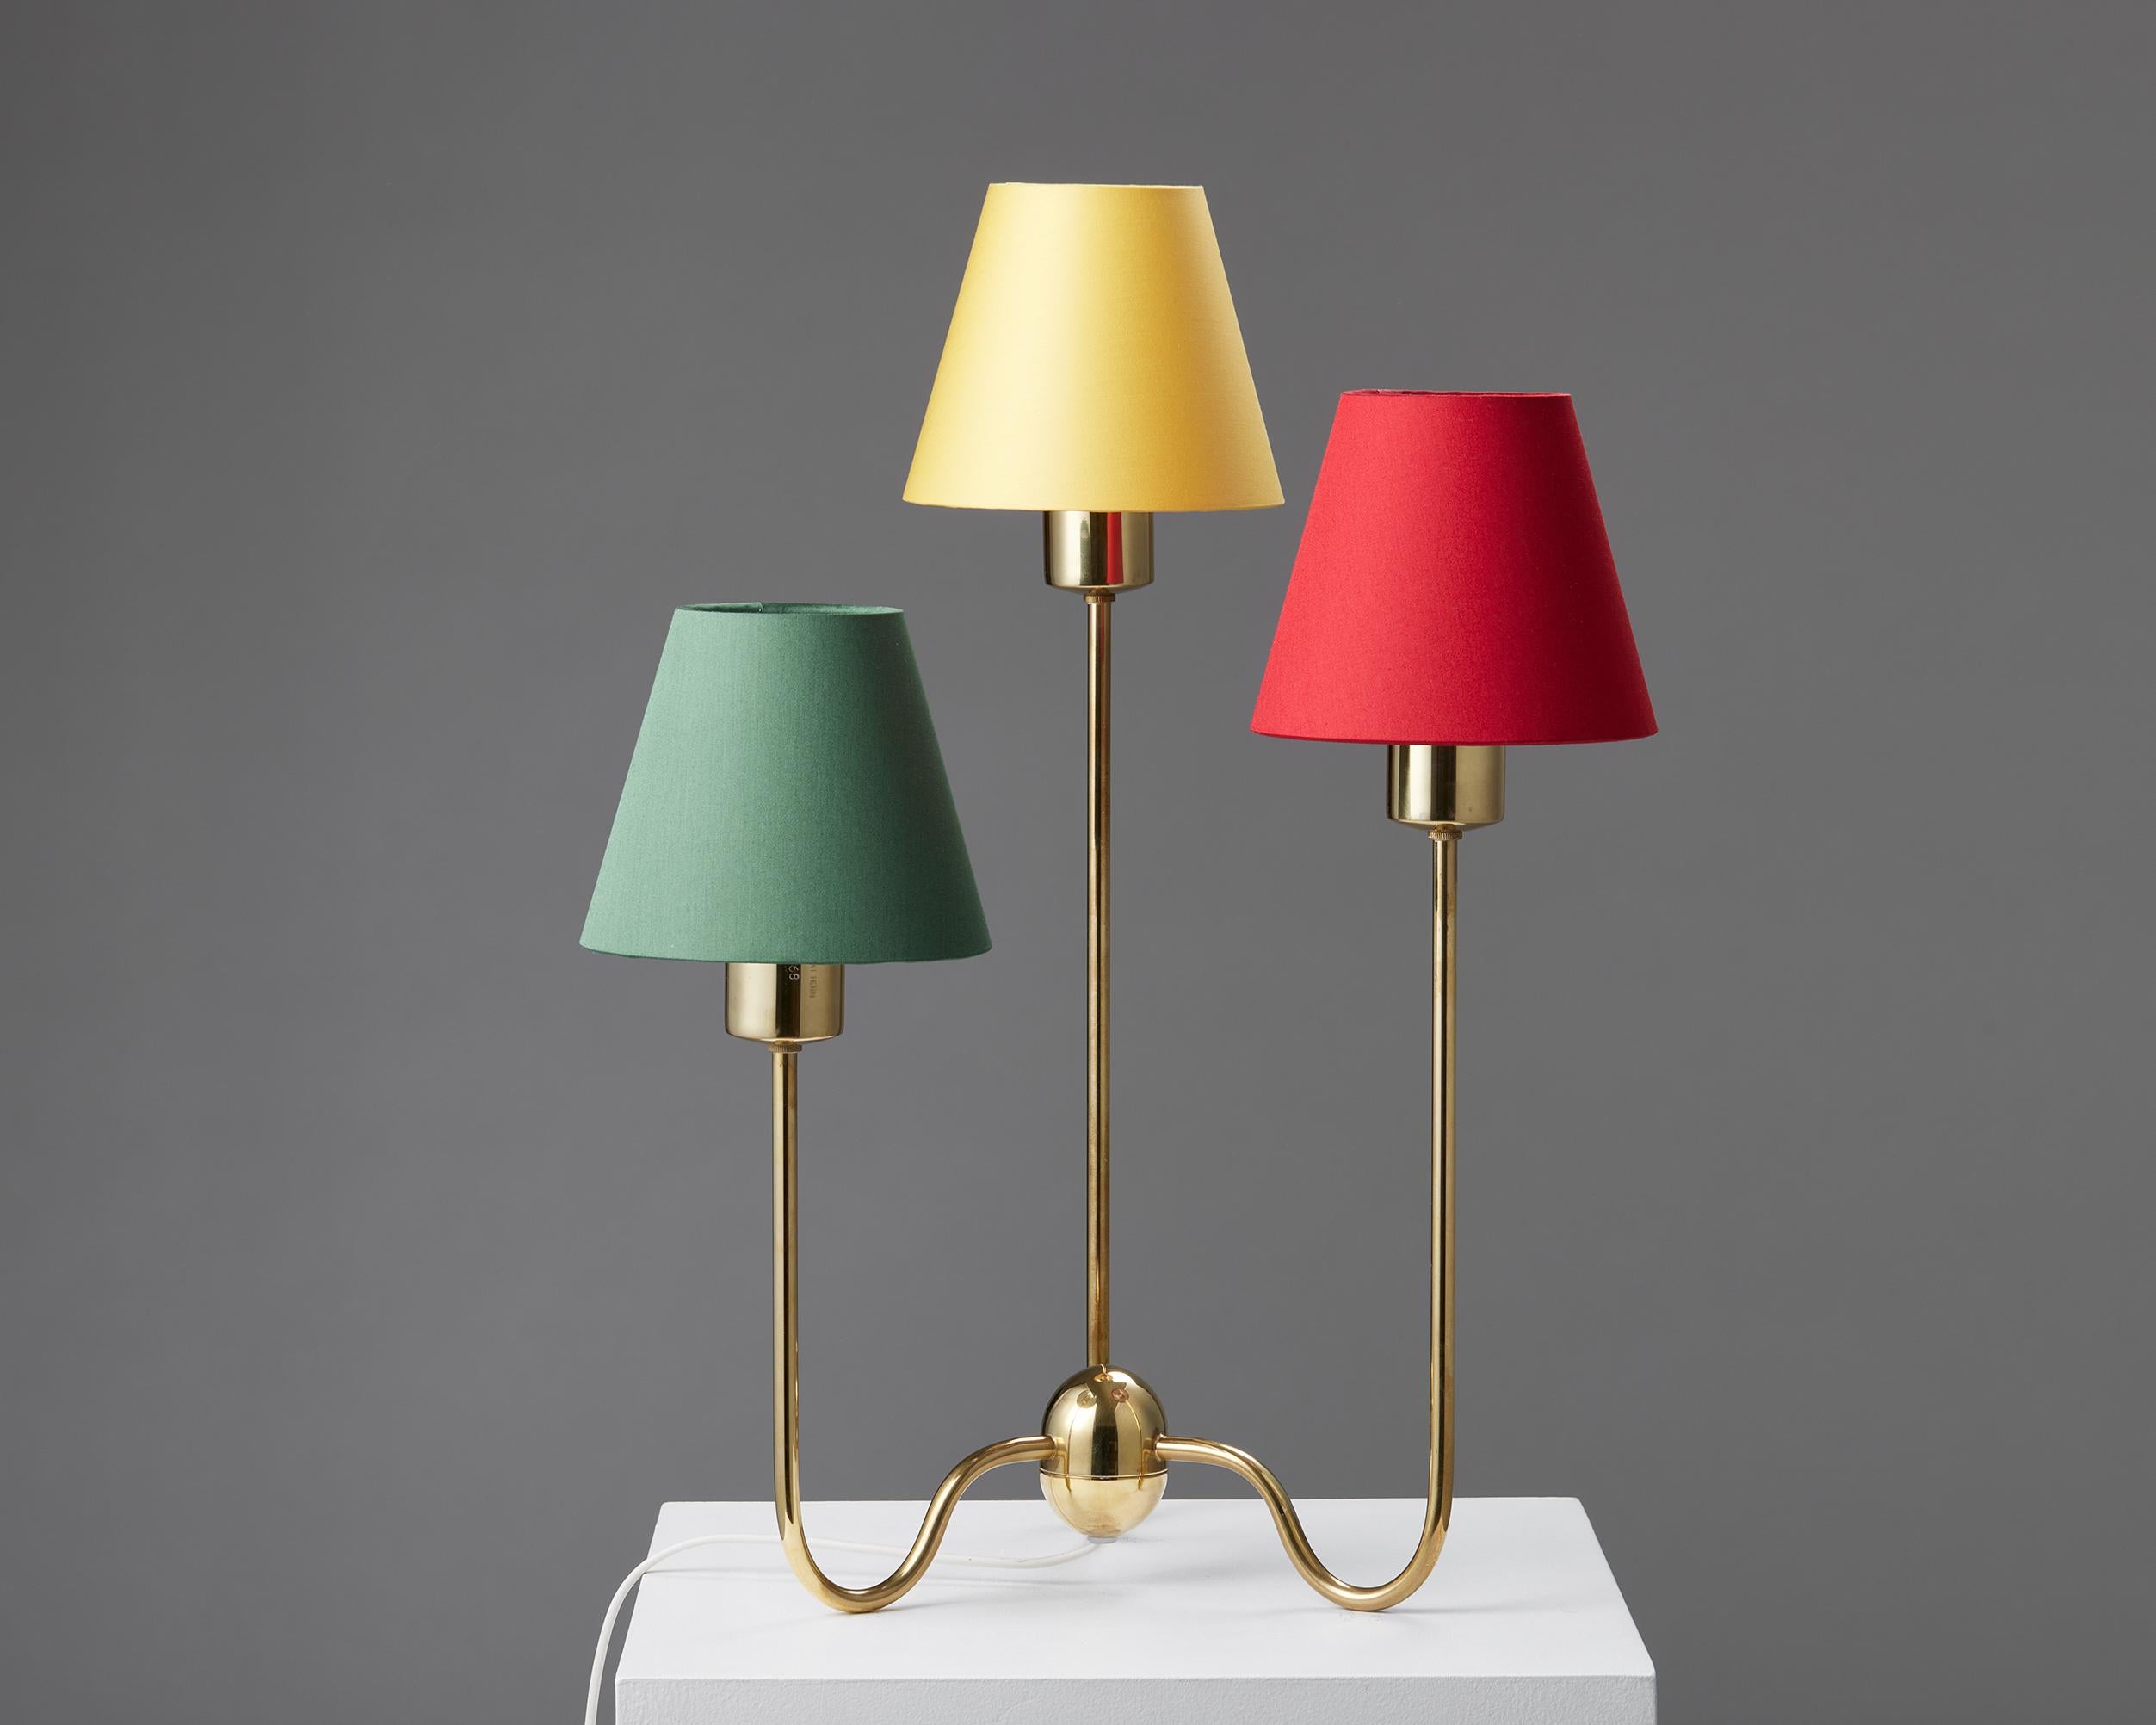 Brass with cotton shades.

Stamped.

Model 2468 is a delightful brass table lamp with three small shades in green, yellow, and red. The lamp has an elegant brass base with three stems that hold the shades at different heights. Because of its